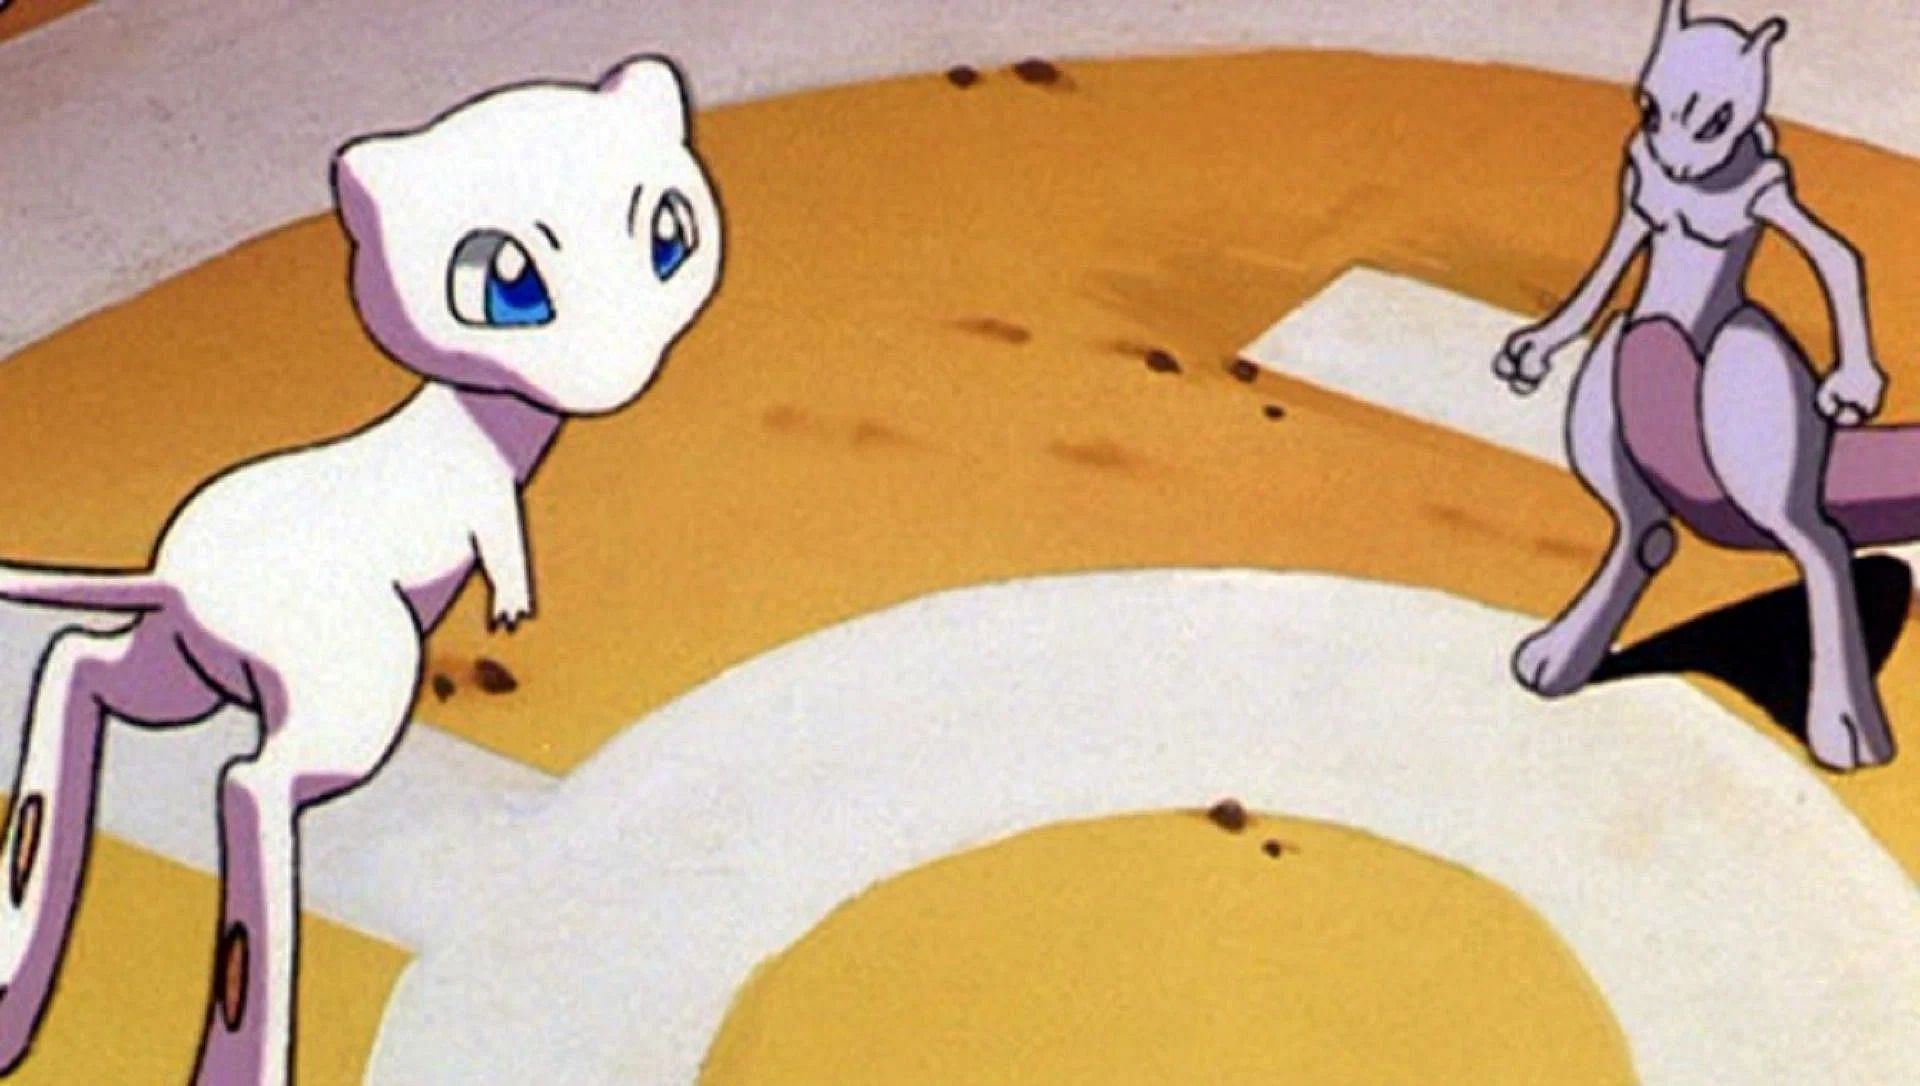 Mew vs Mewtwo: Which is a better Pocket Monster in Pokemon GO? (February  2023)